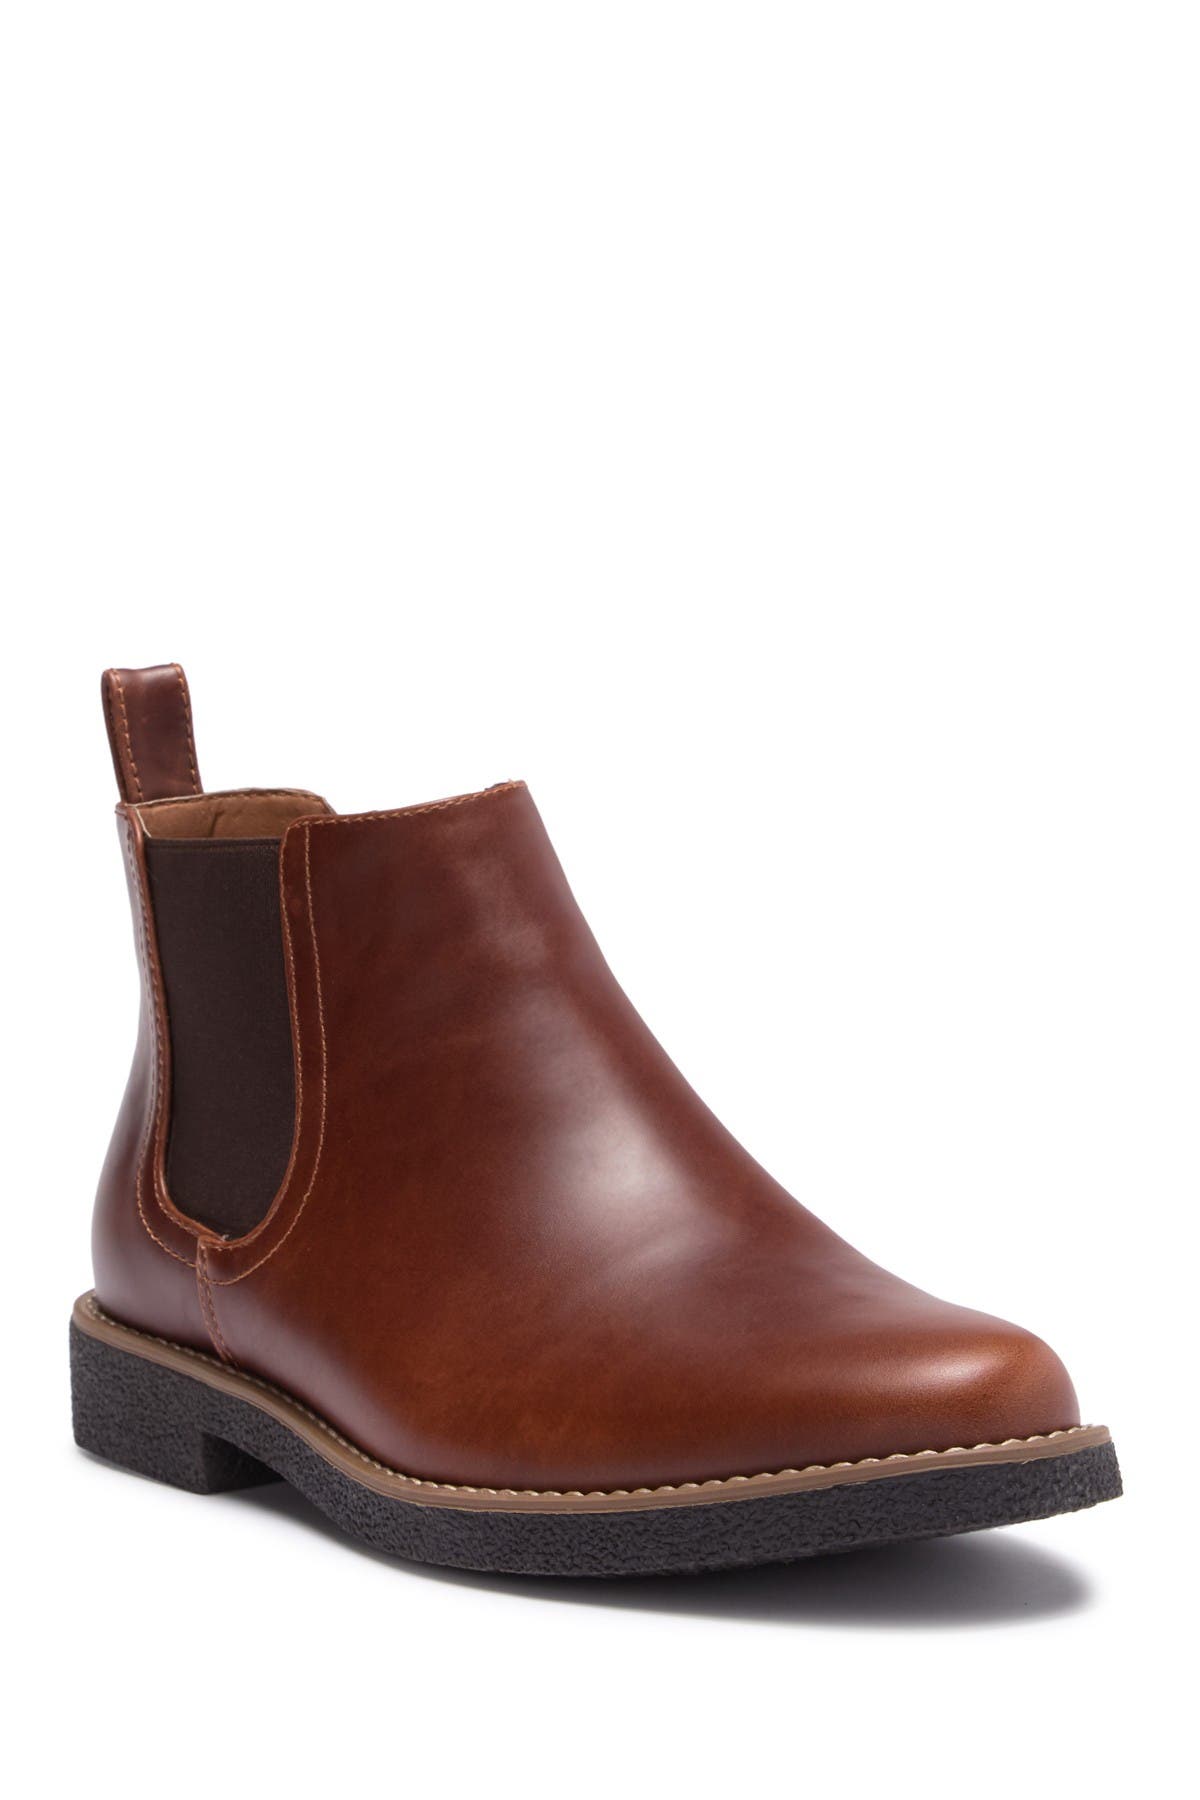 mens chelsea boots wide